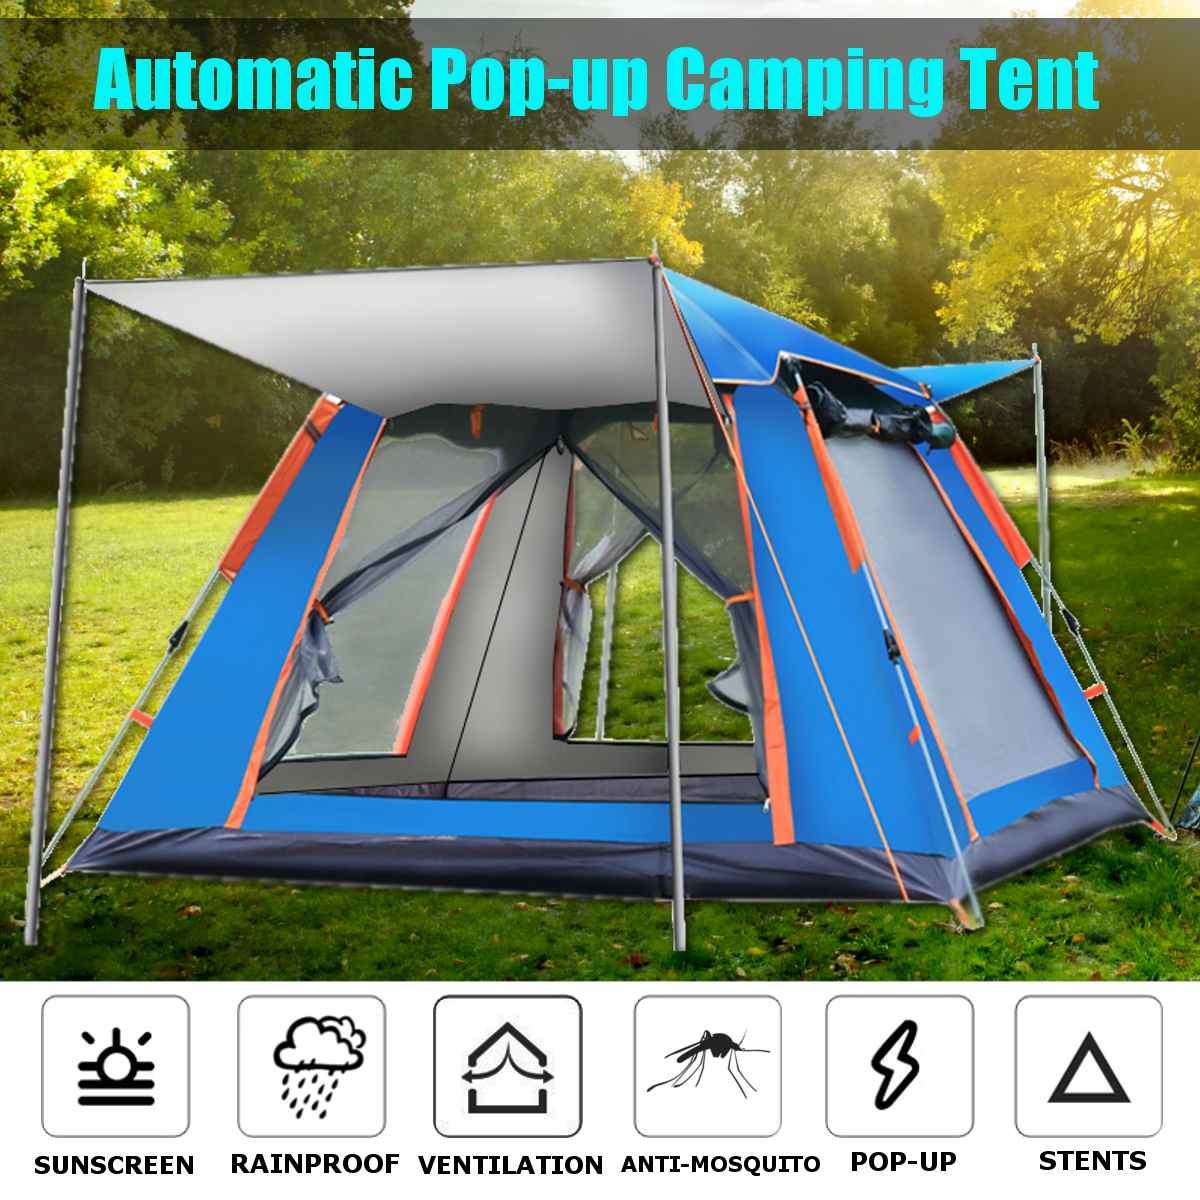 Cheap Goat Tents 3 4 Person Fully Automatic Double Layer Waterproof Hiking Camping Tent Easy Setup Pop Up Self Outdoor Large Family Gazebo Tent Tents